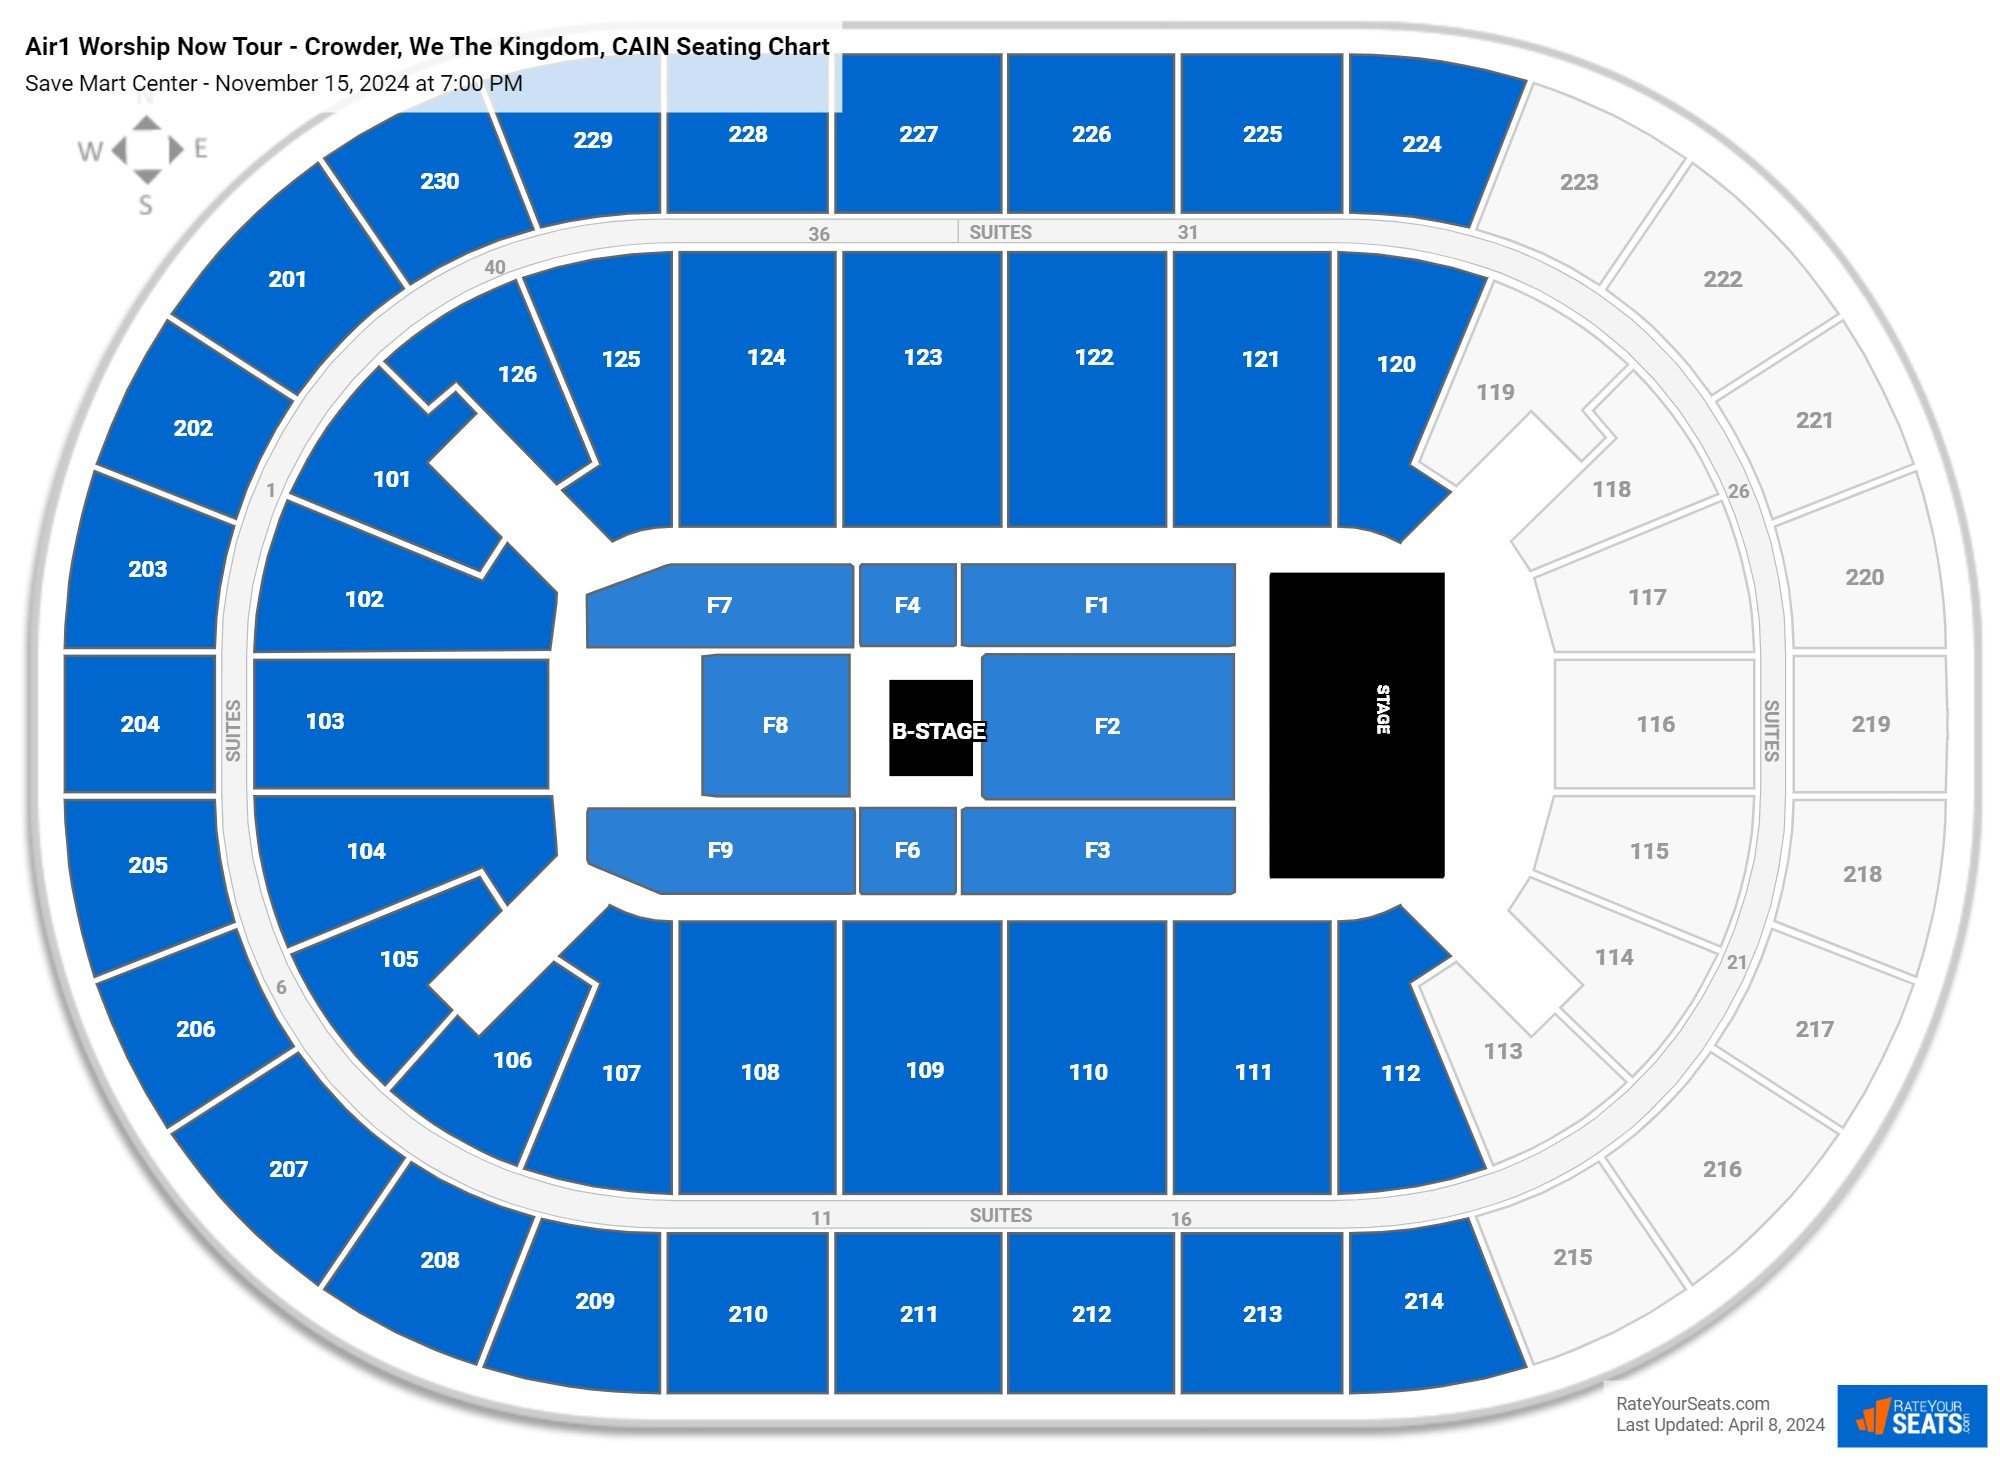 Air1 Worship Now Tour - Crowder, We The Kingdom, CAIN seating chart Save Mart Center